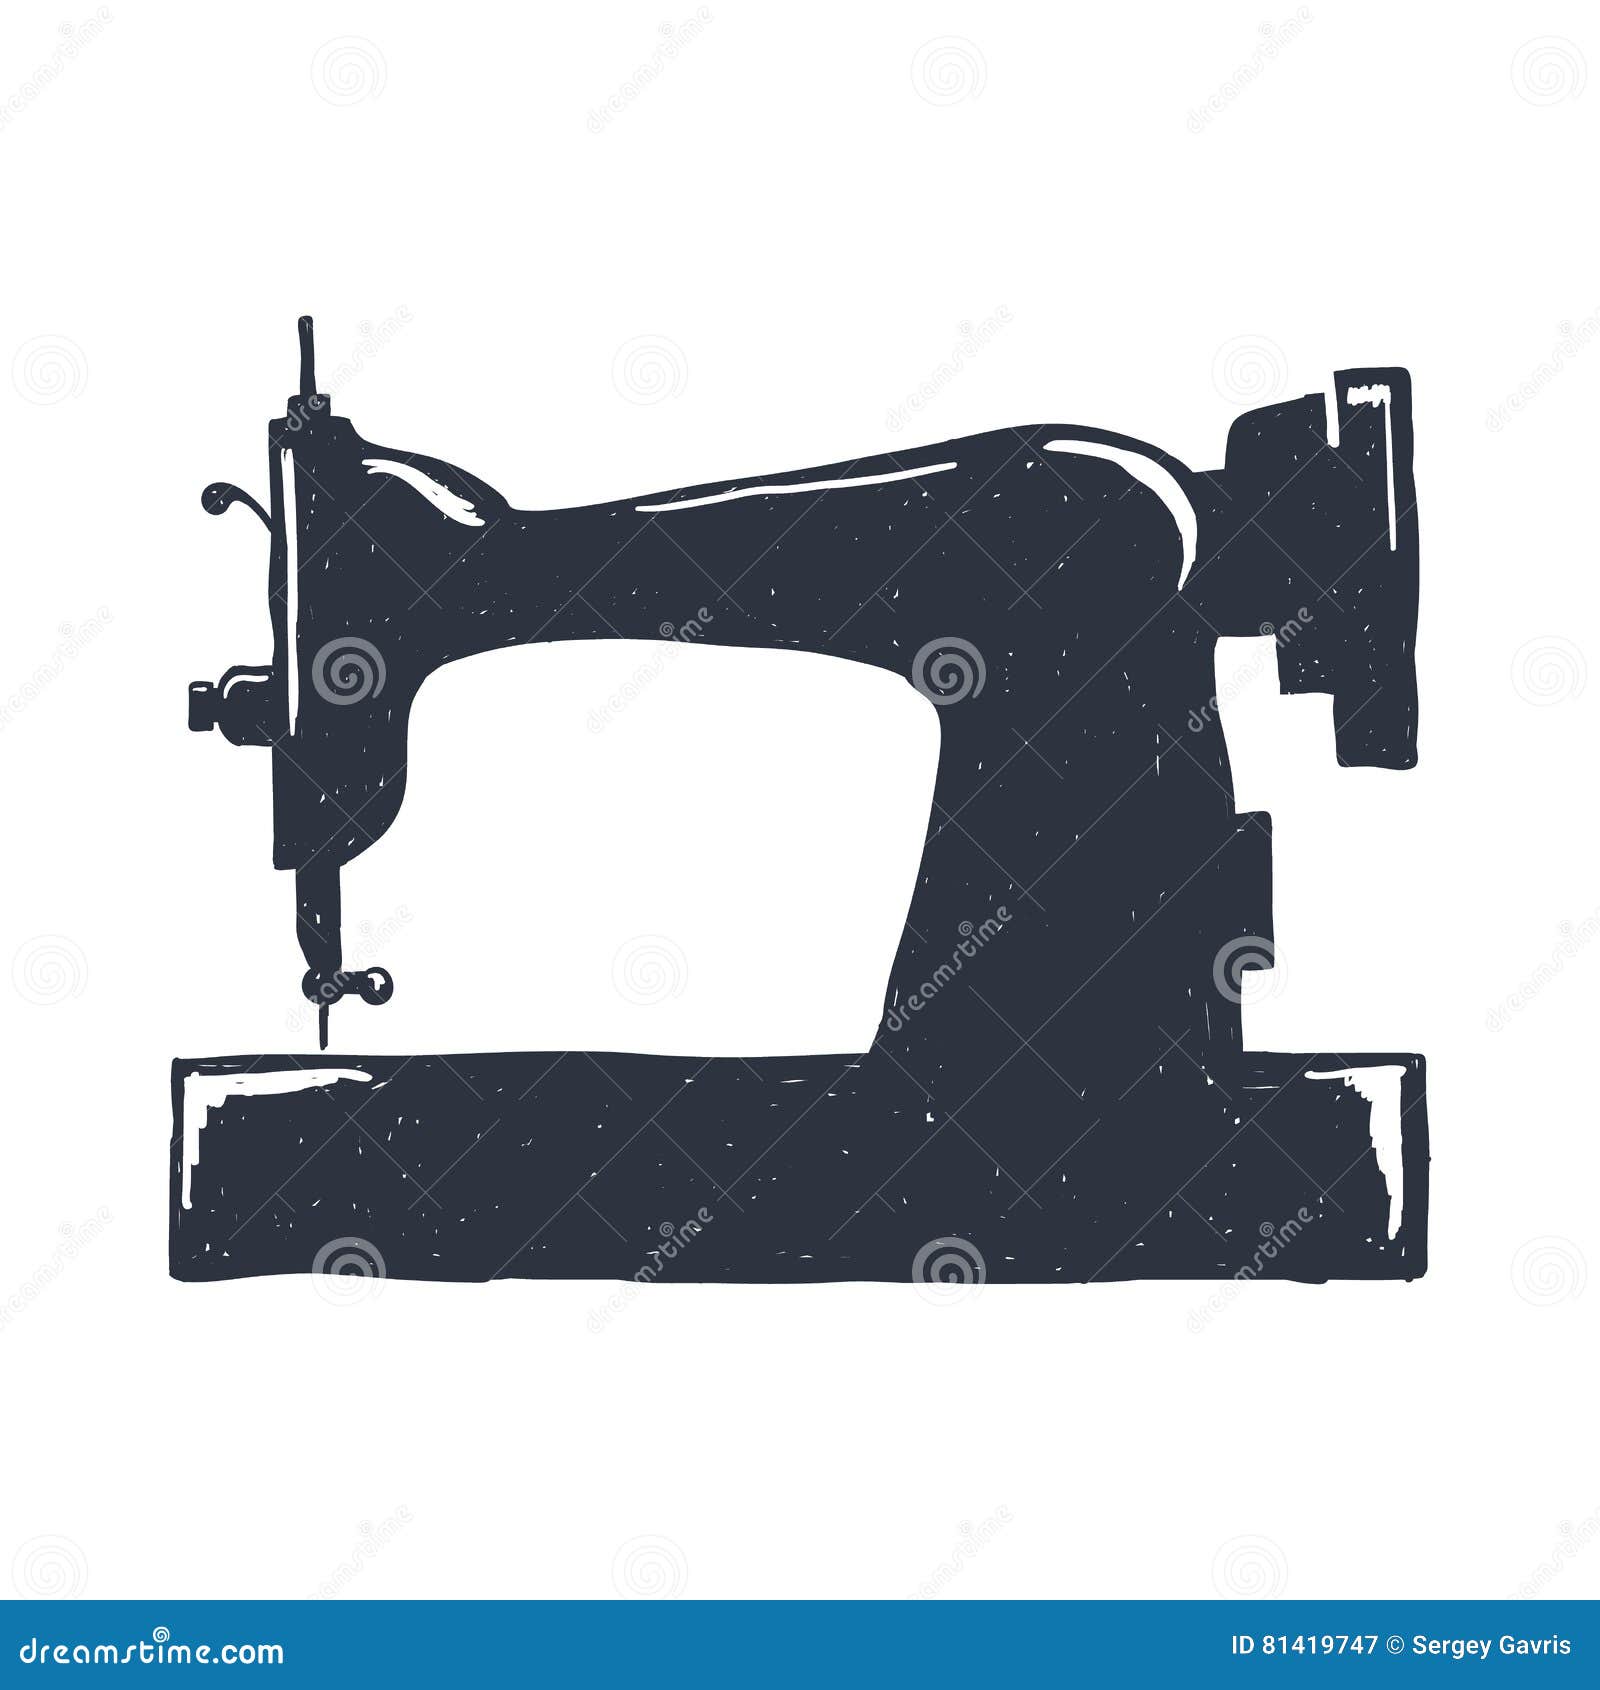 Manual Sew Machine Icon Stock Illustration - Download Image Now - Aging  Process, Ancient, Antique - iStock